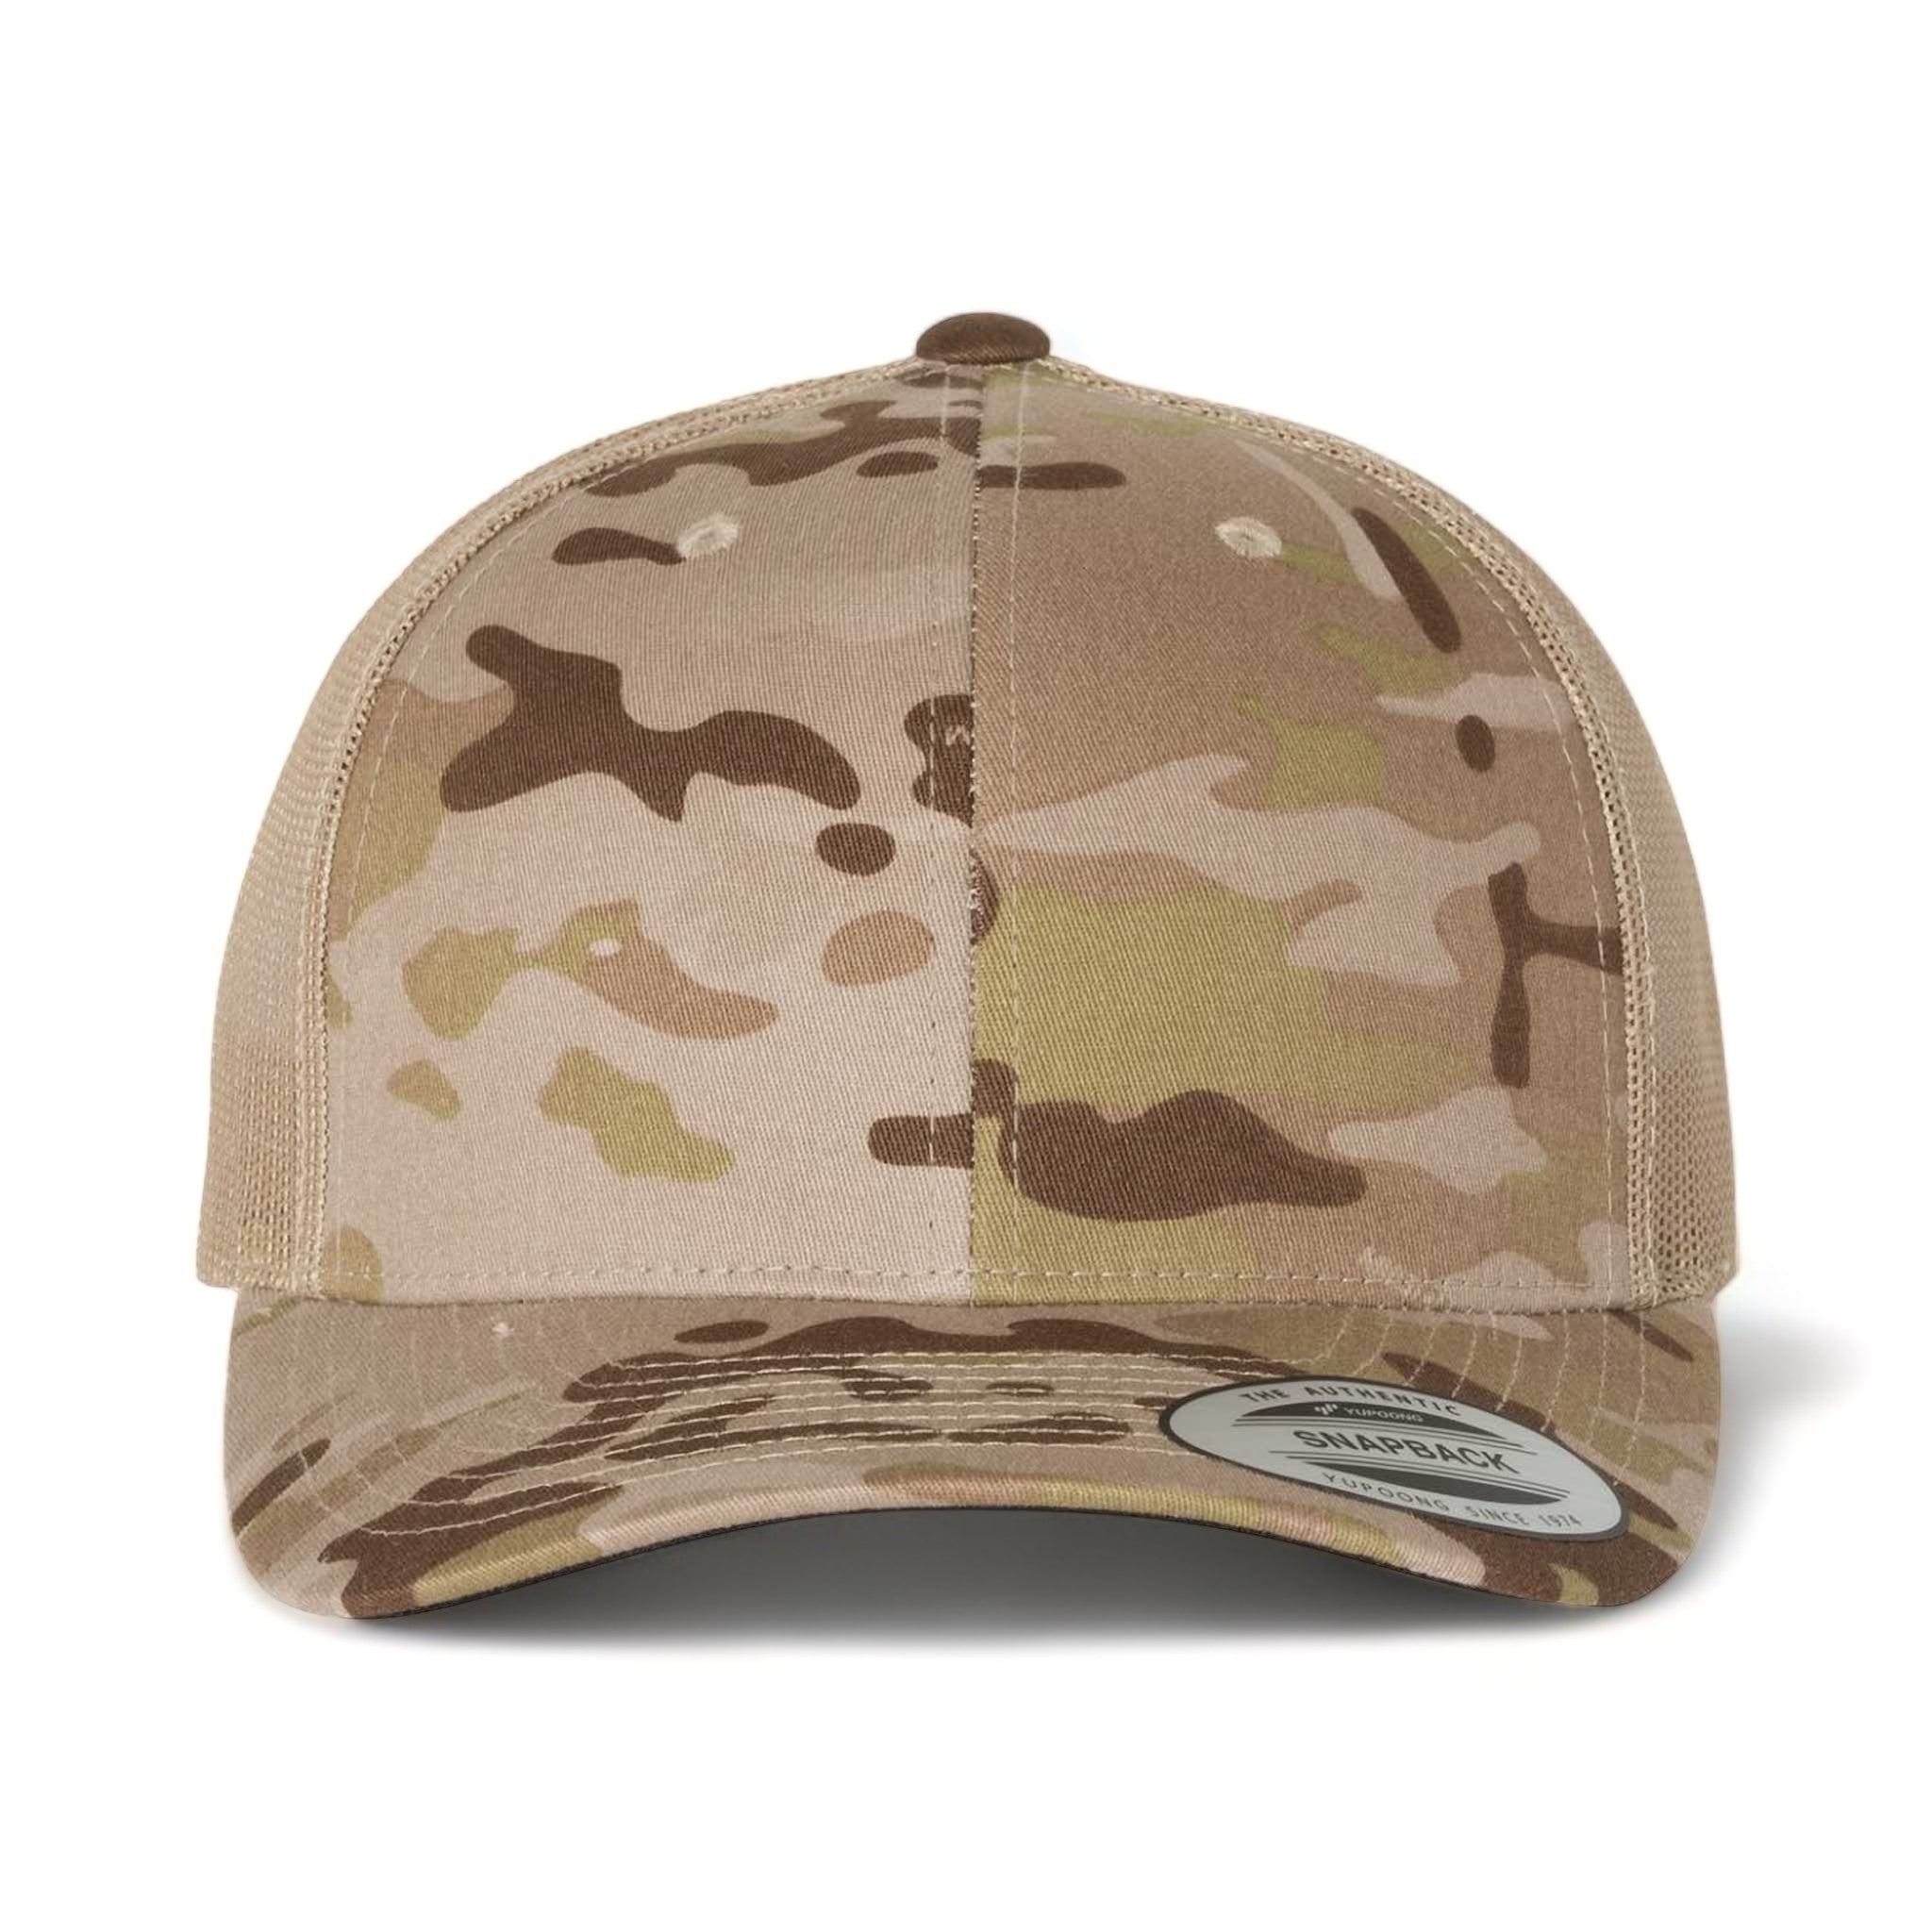 Front view of YP Classics 6606 custom hat in multicam arid and tan